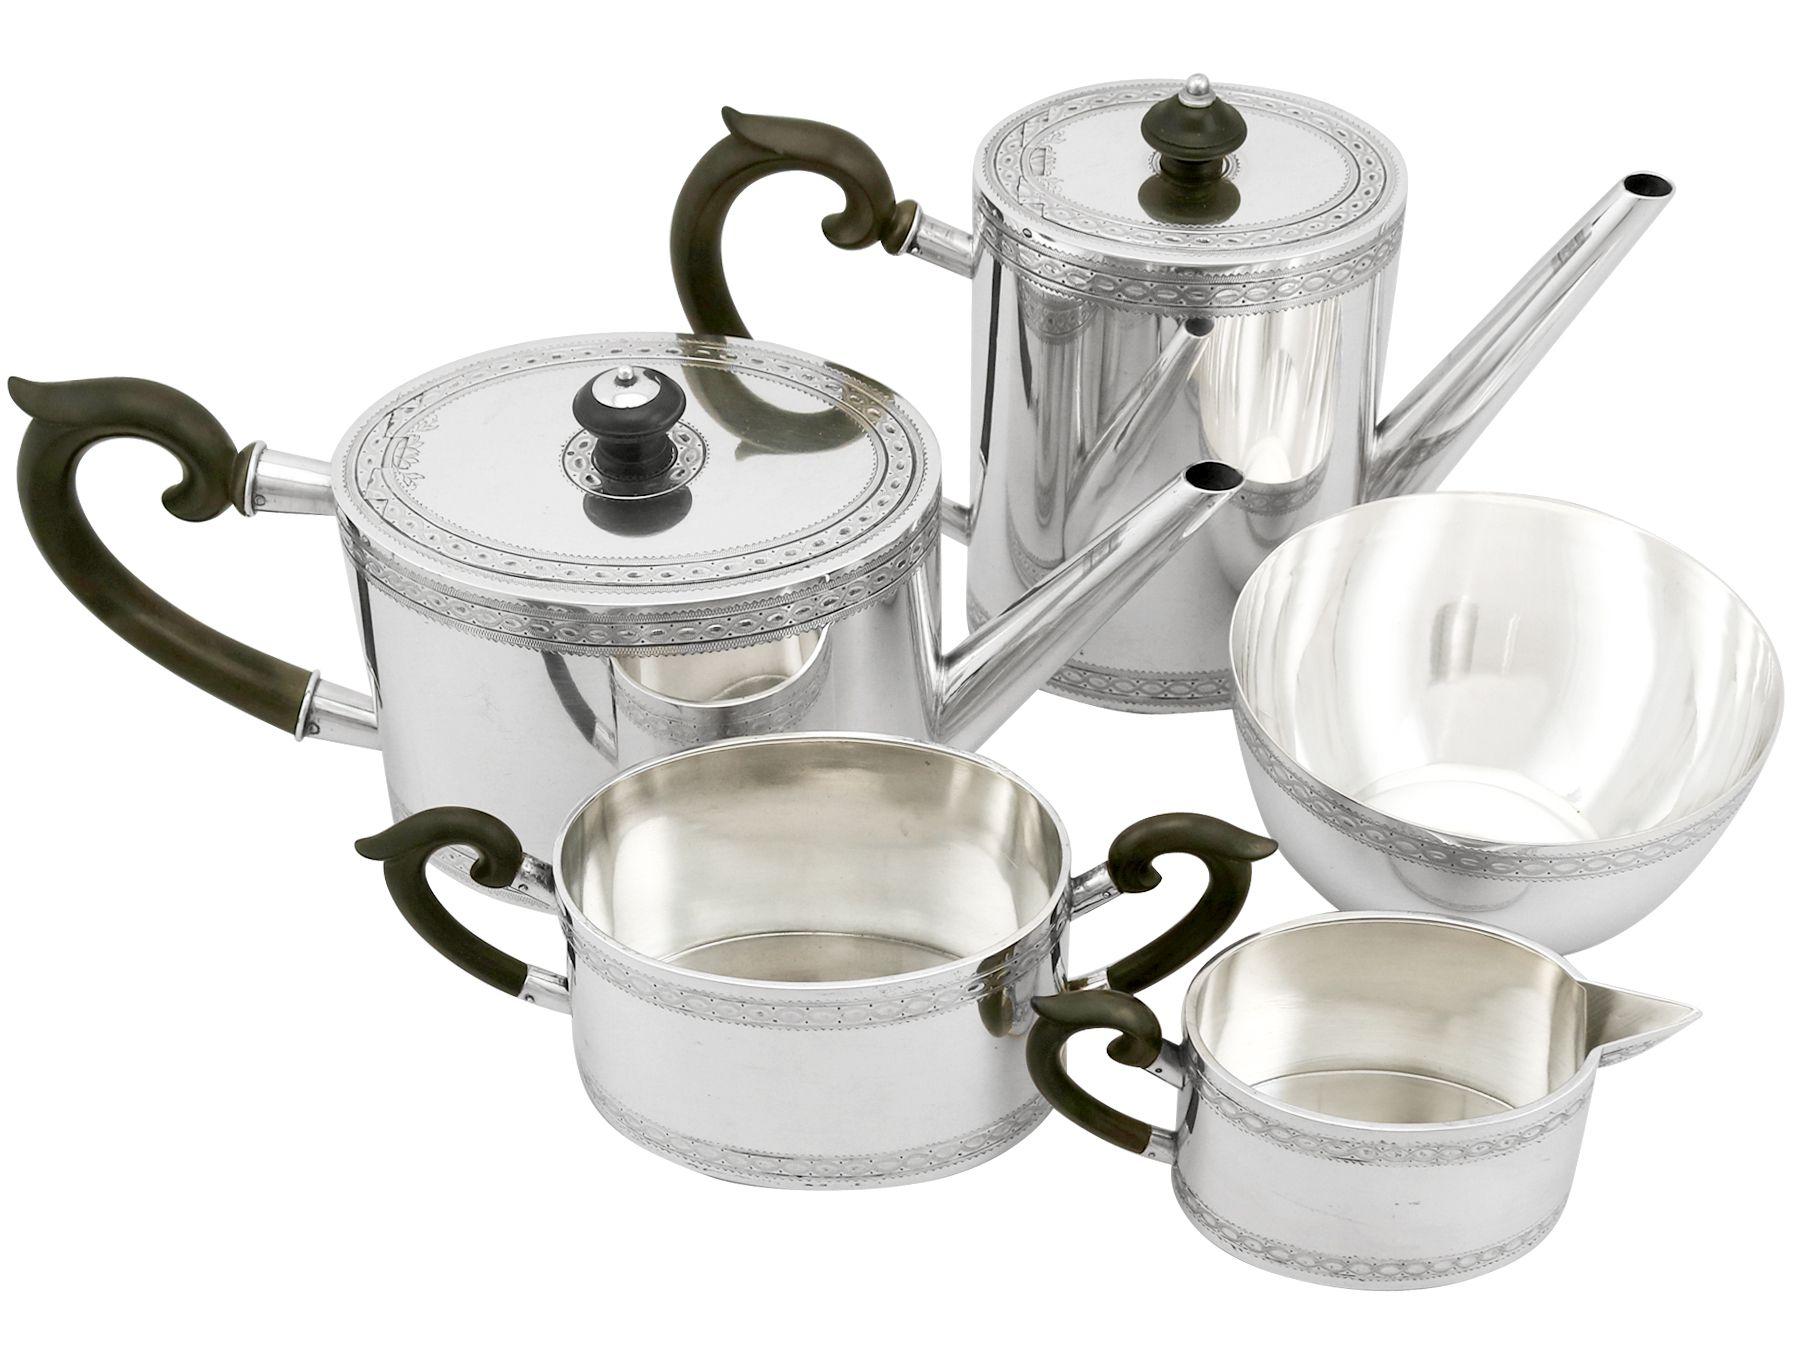 An exceptional, fine and impressive antique European sterling silver five-piece tea and coffee set/service; part of our silver teaware collection.

This exceptional antique European silver tea and coffee set consists of a coffee pot, teapot, cream